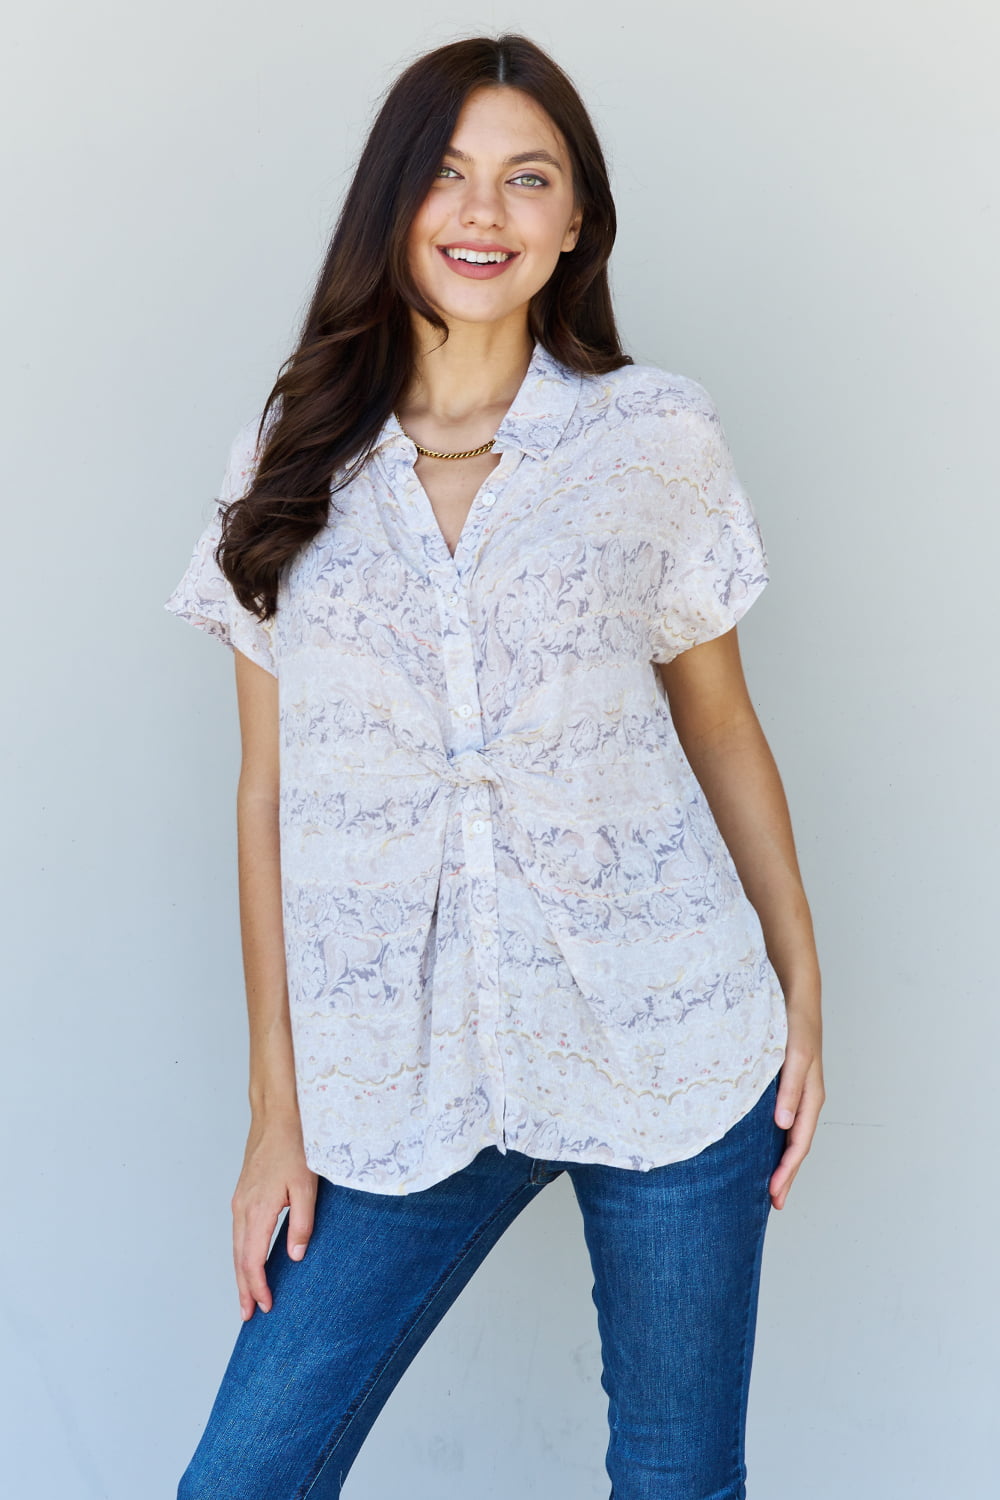 BACK TO COLLEGE   ODDI Full Size Floral Paisley Print Twist Tunic Top